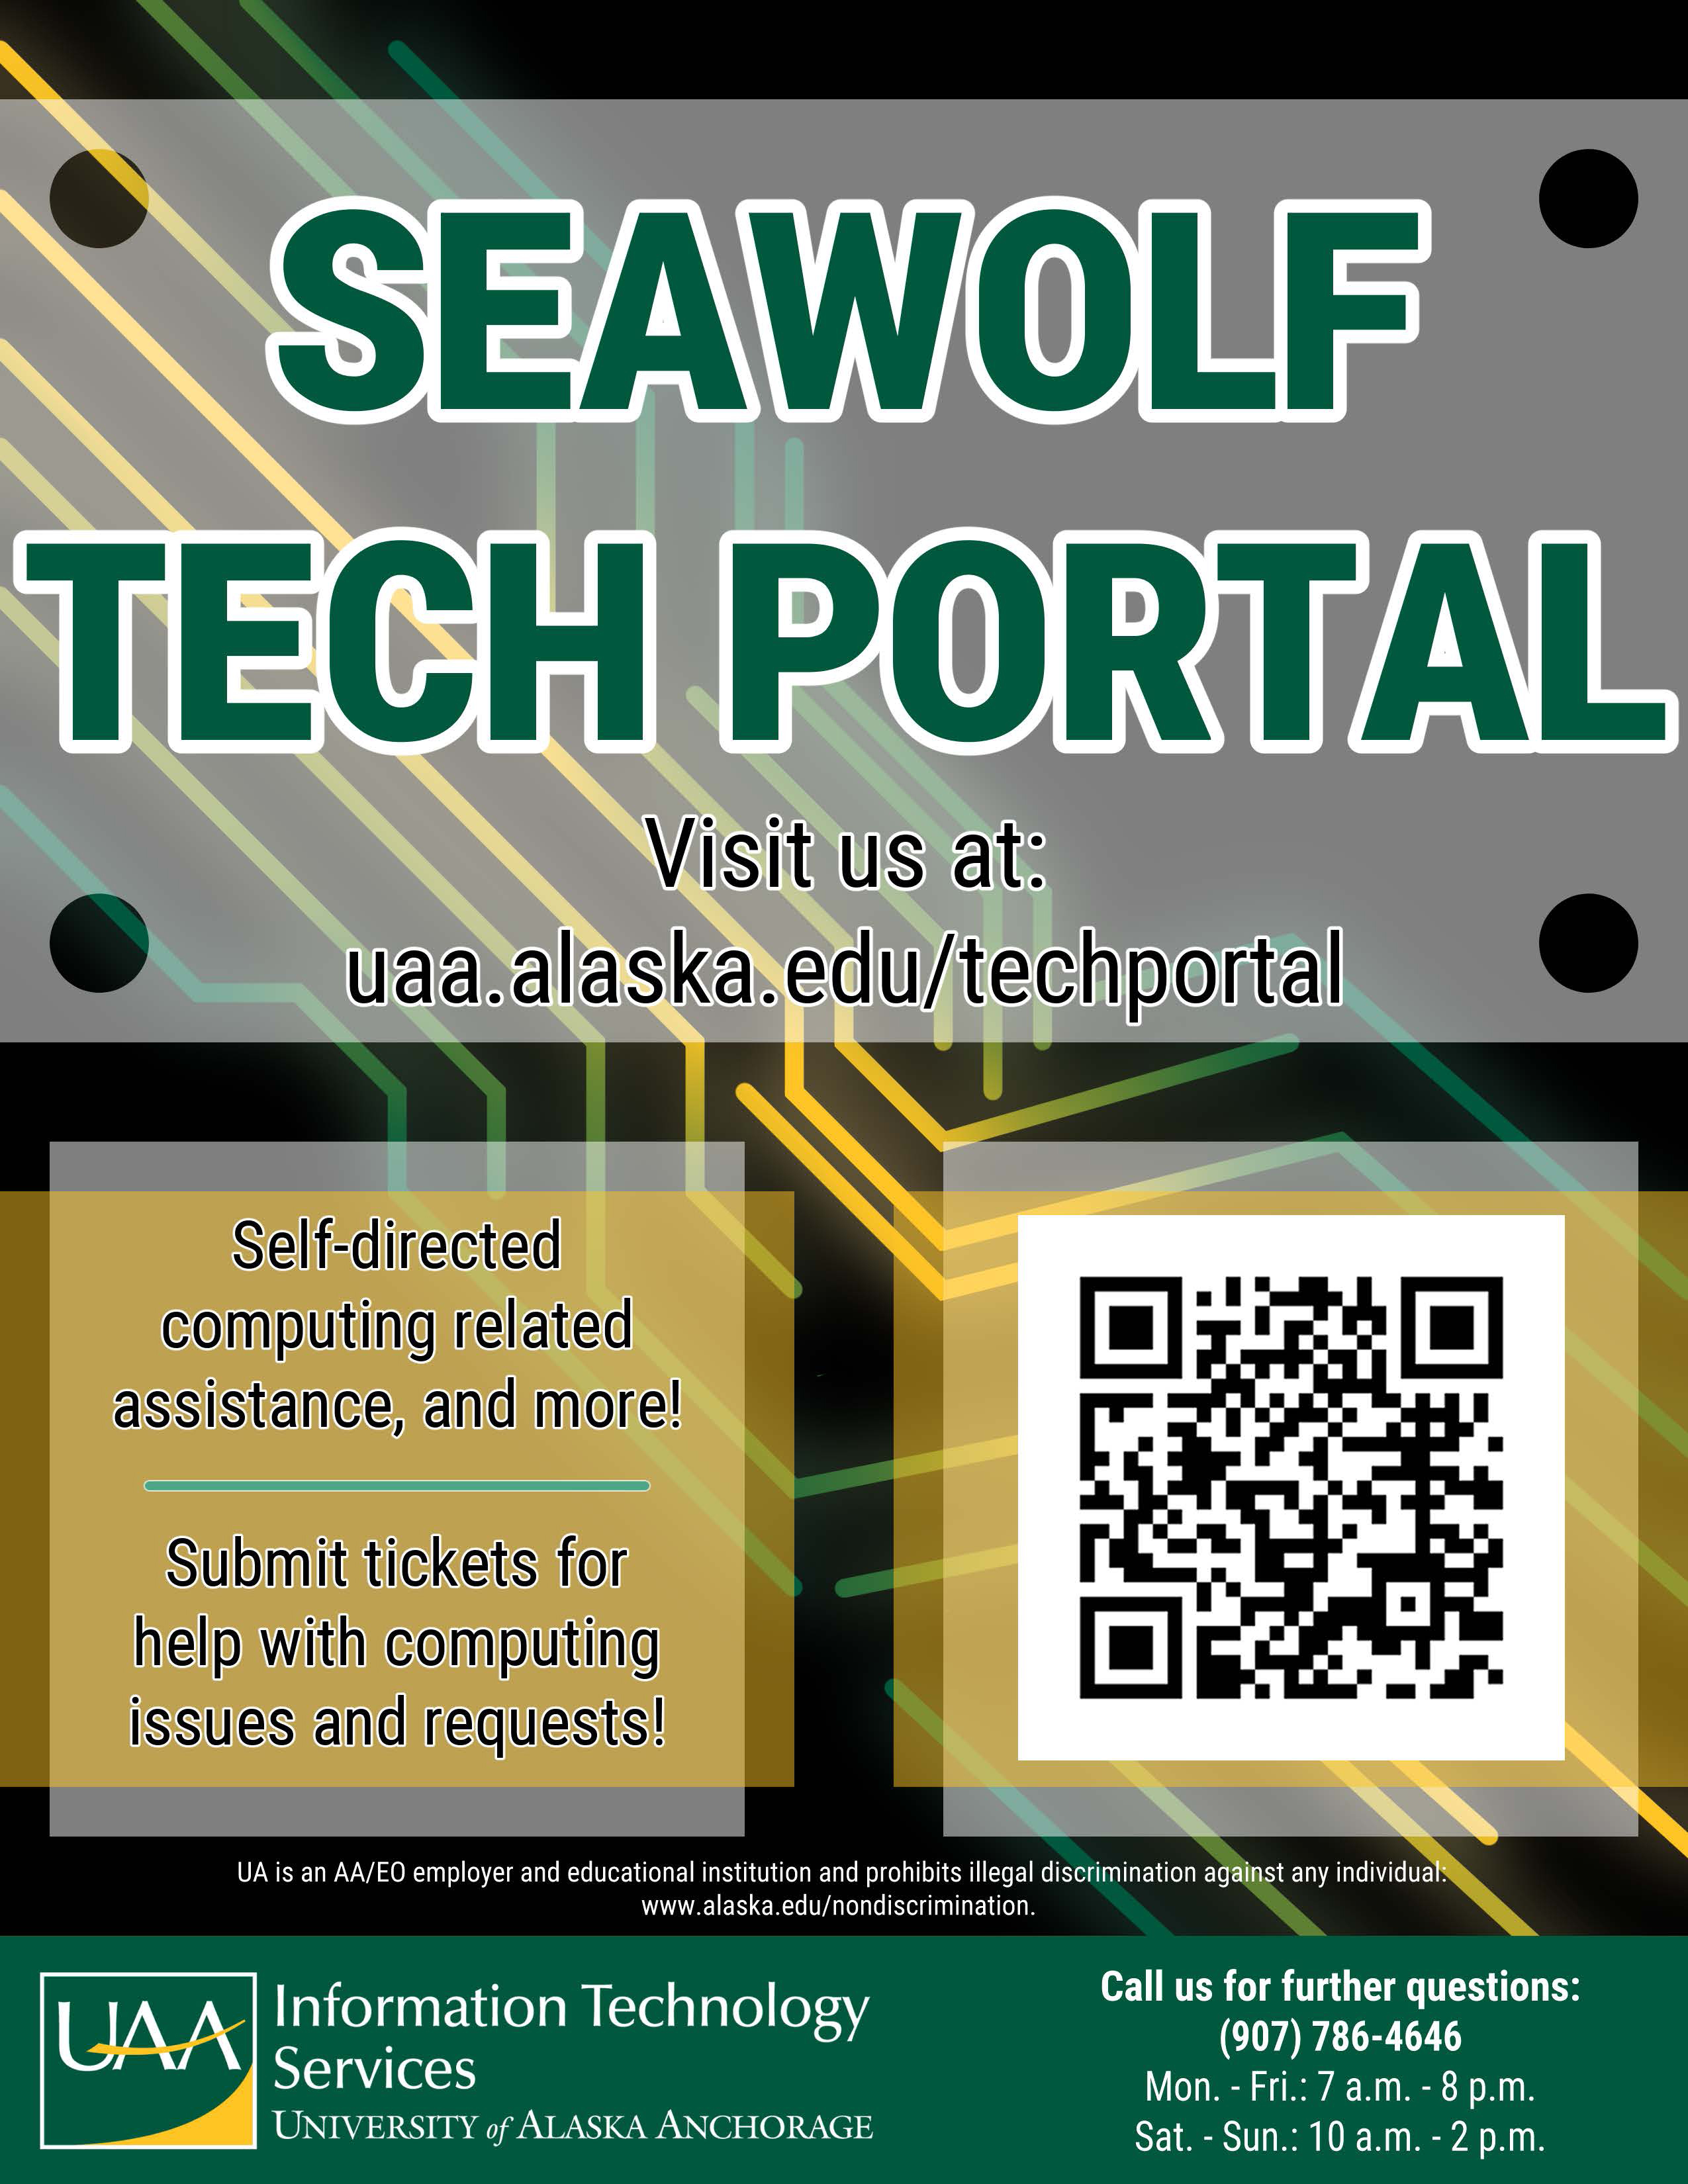 Seawolf Tech Portal is here! Visit us at uaa.alaska.edu/techportal for self-directed computing related assistance and more! Plus, submit tickets for help with computing issues and requests. Call us at (907) 786-4646 for further questions.